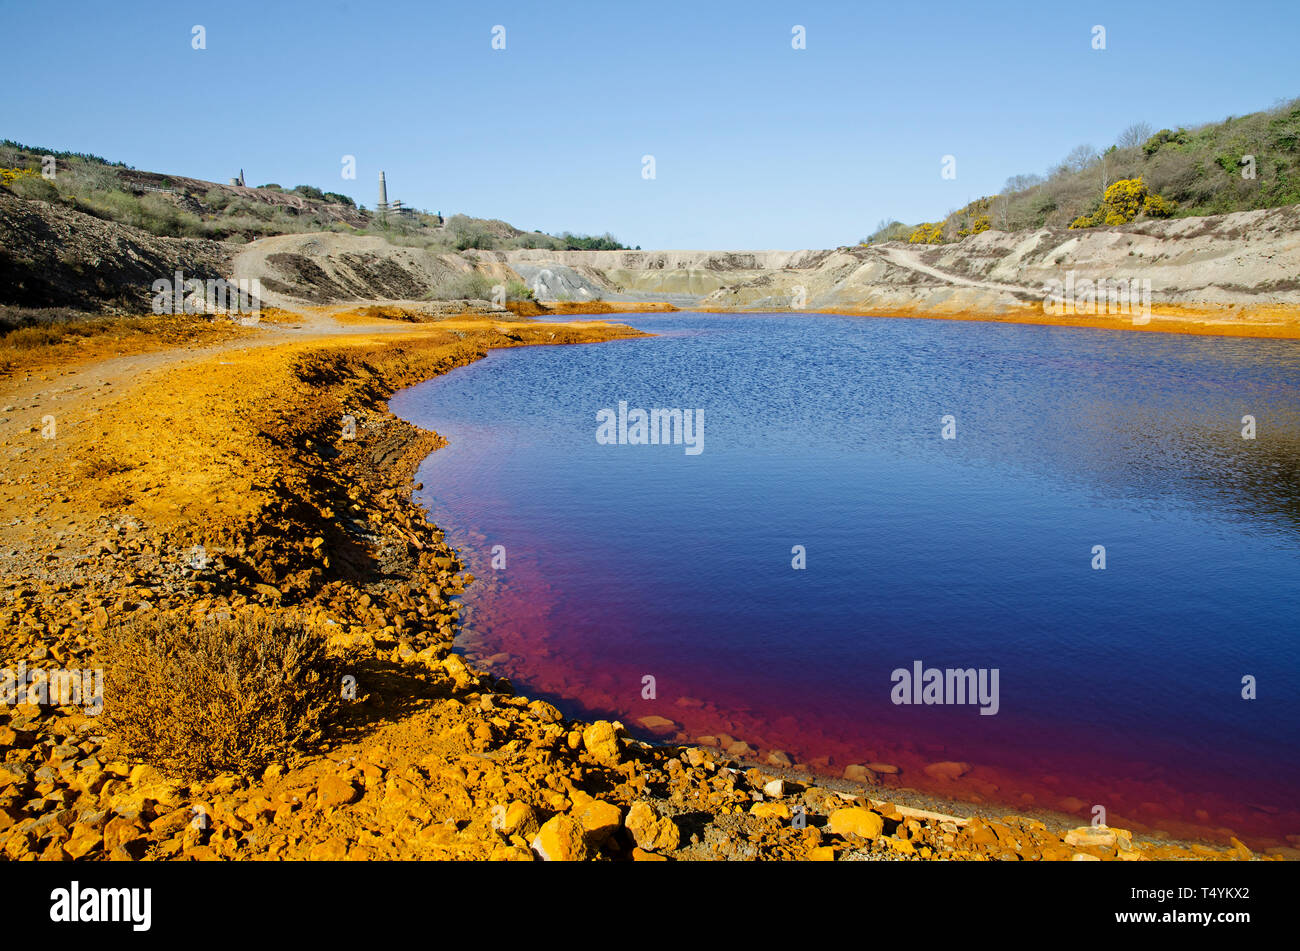 industrial pollution from old tin mine workings near St. Day in cornwall, england, britain, uk. Stock Photo